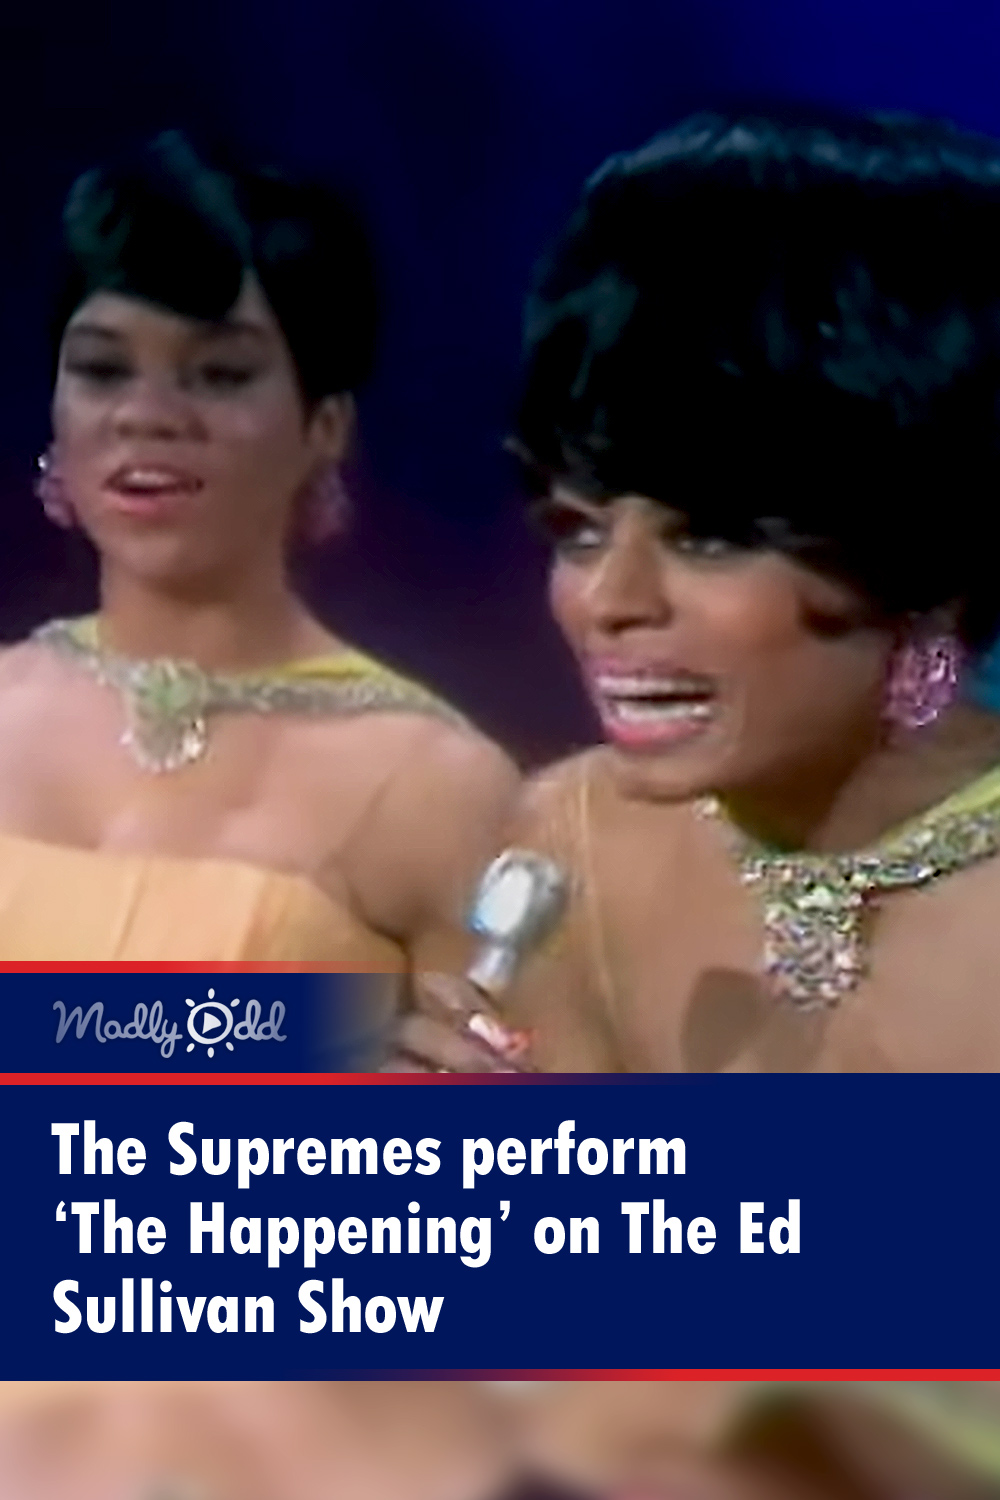 The Supremes perform ‘The Happening’ on The Ed Sullivan Show